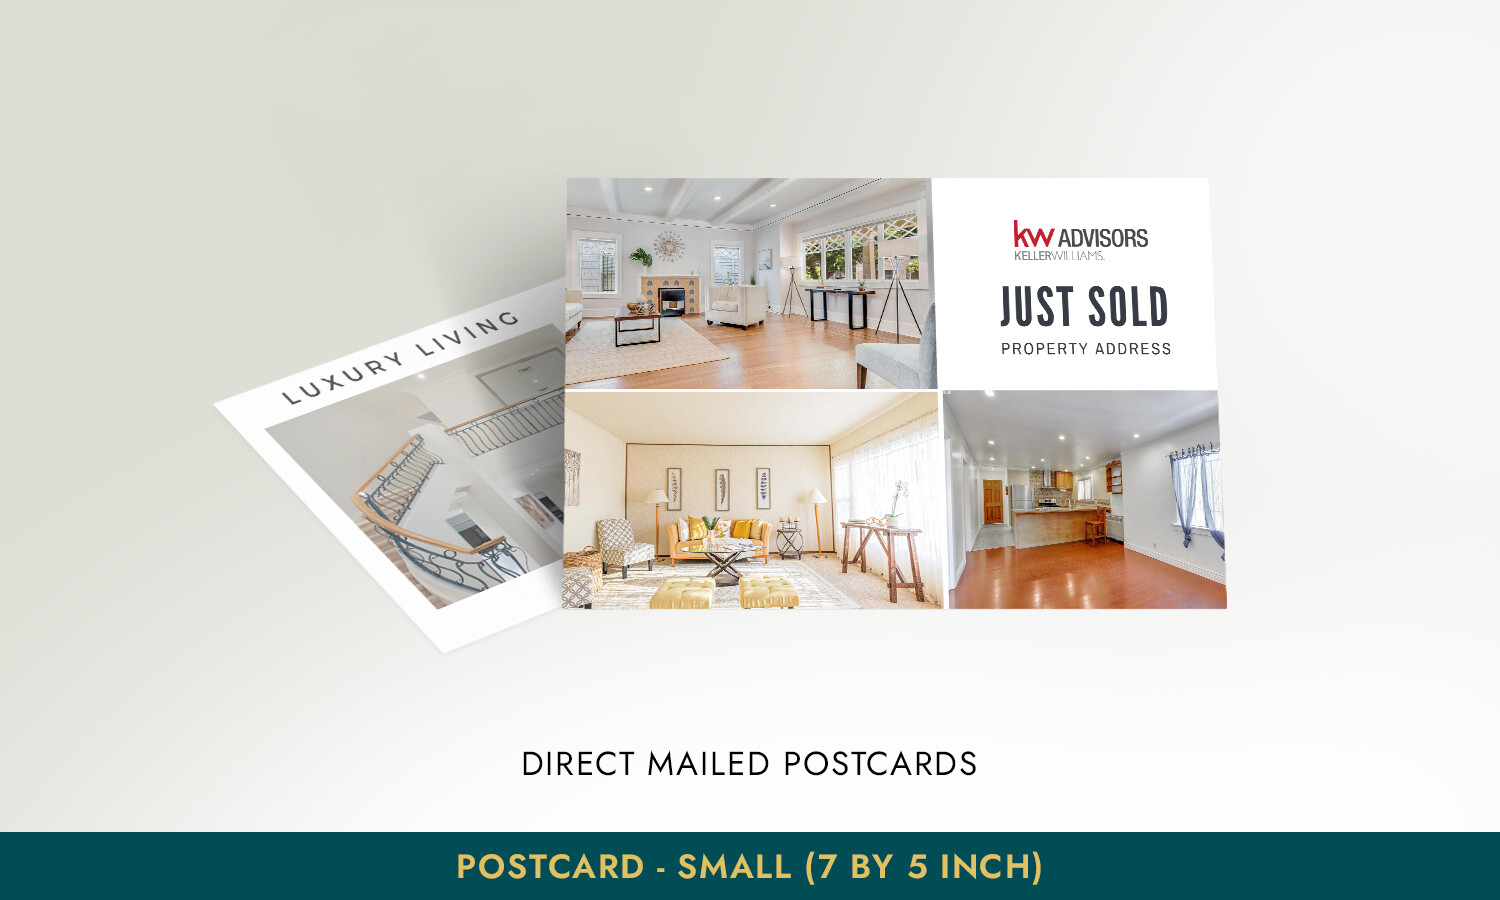 Direct Mailed Postcards - Small